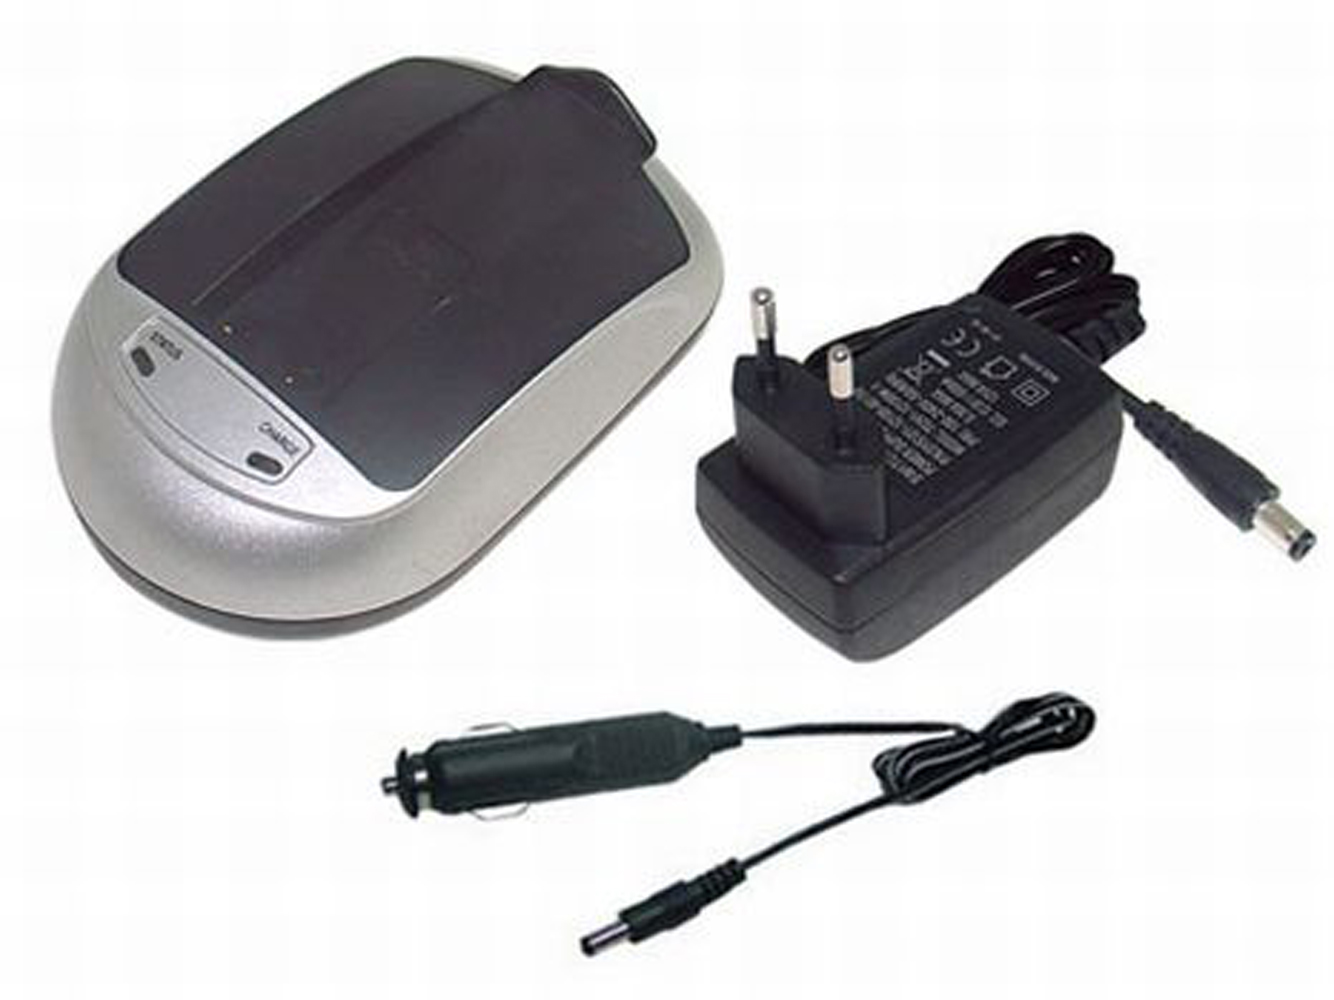 Casio Np-50, Np-50dba Battery Chargers For Casio Ex-v8, Casio Exilim Ex-v7 replacement